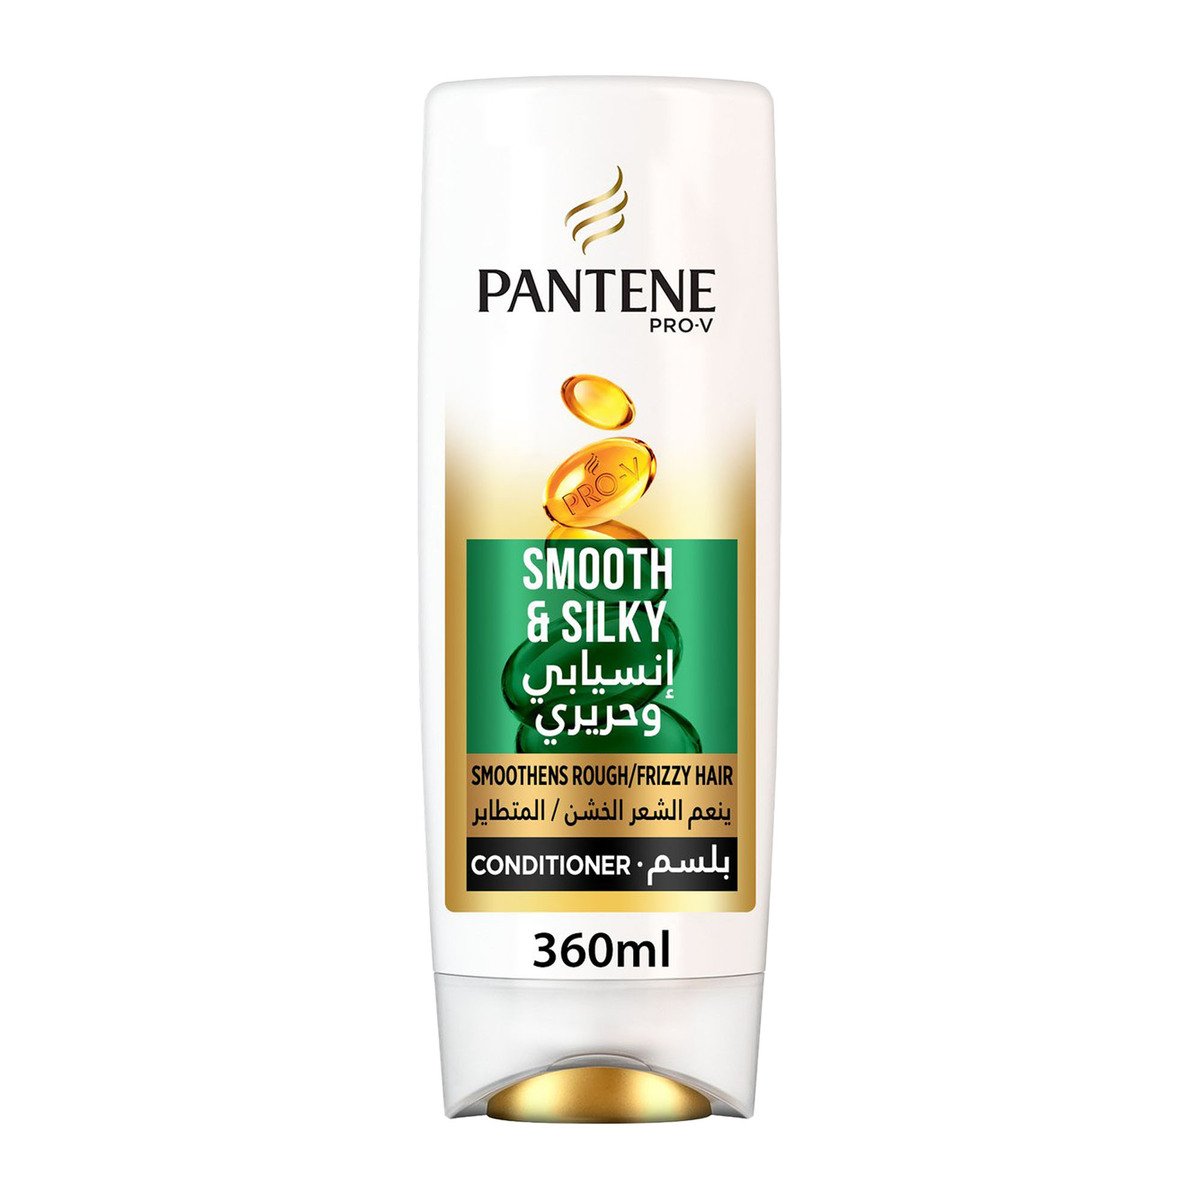 Pantene Pro-V Smooth & Silky Conditioner 360 ml + Oil Replacement 275 ml